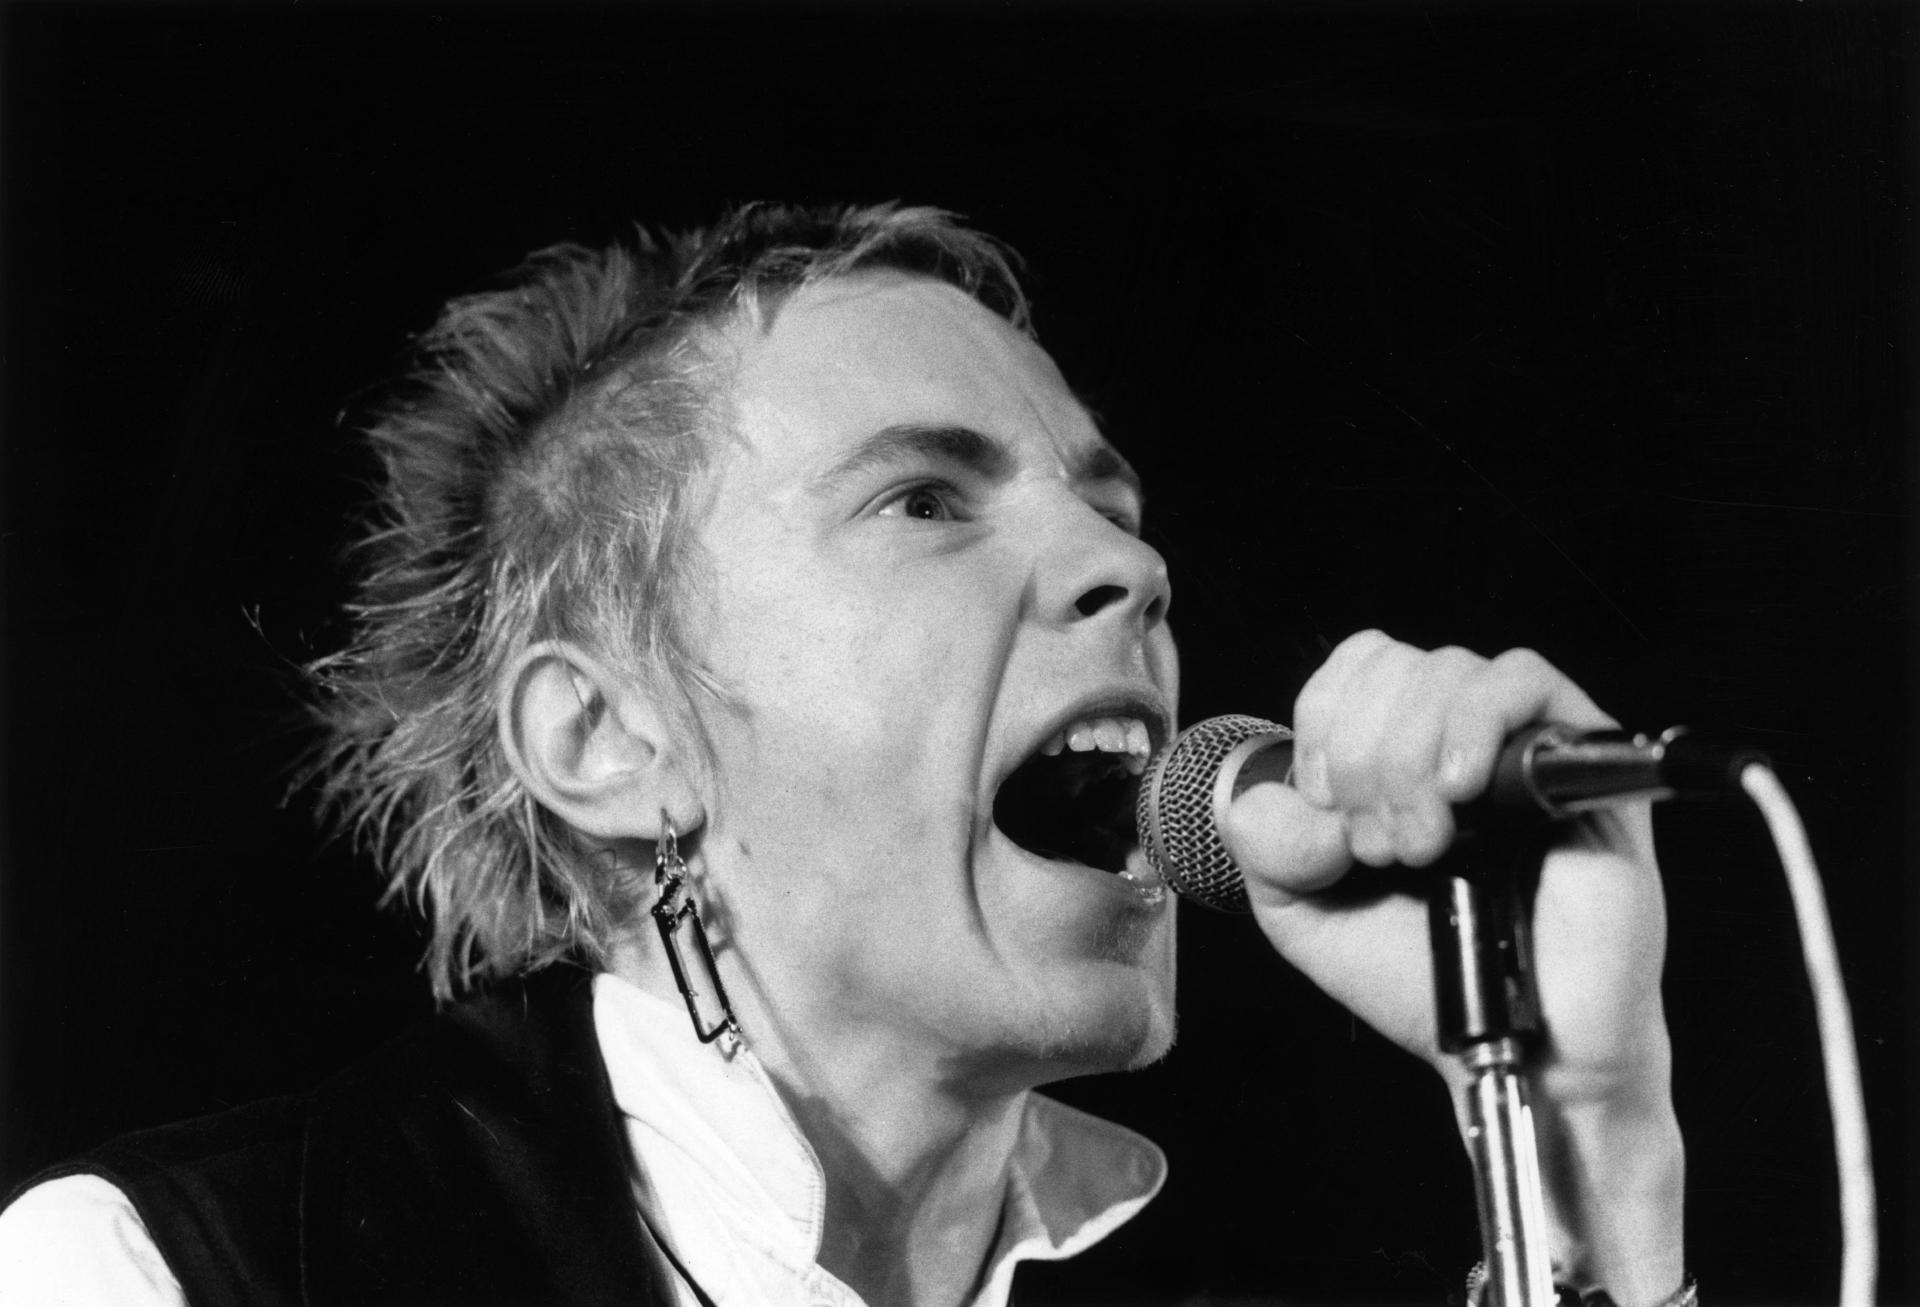 Lydon during his Sex Pistol days as Johnny Rotten.